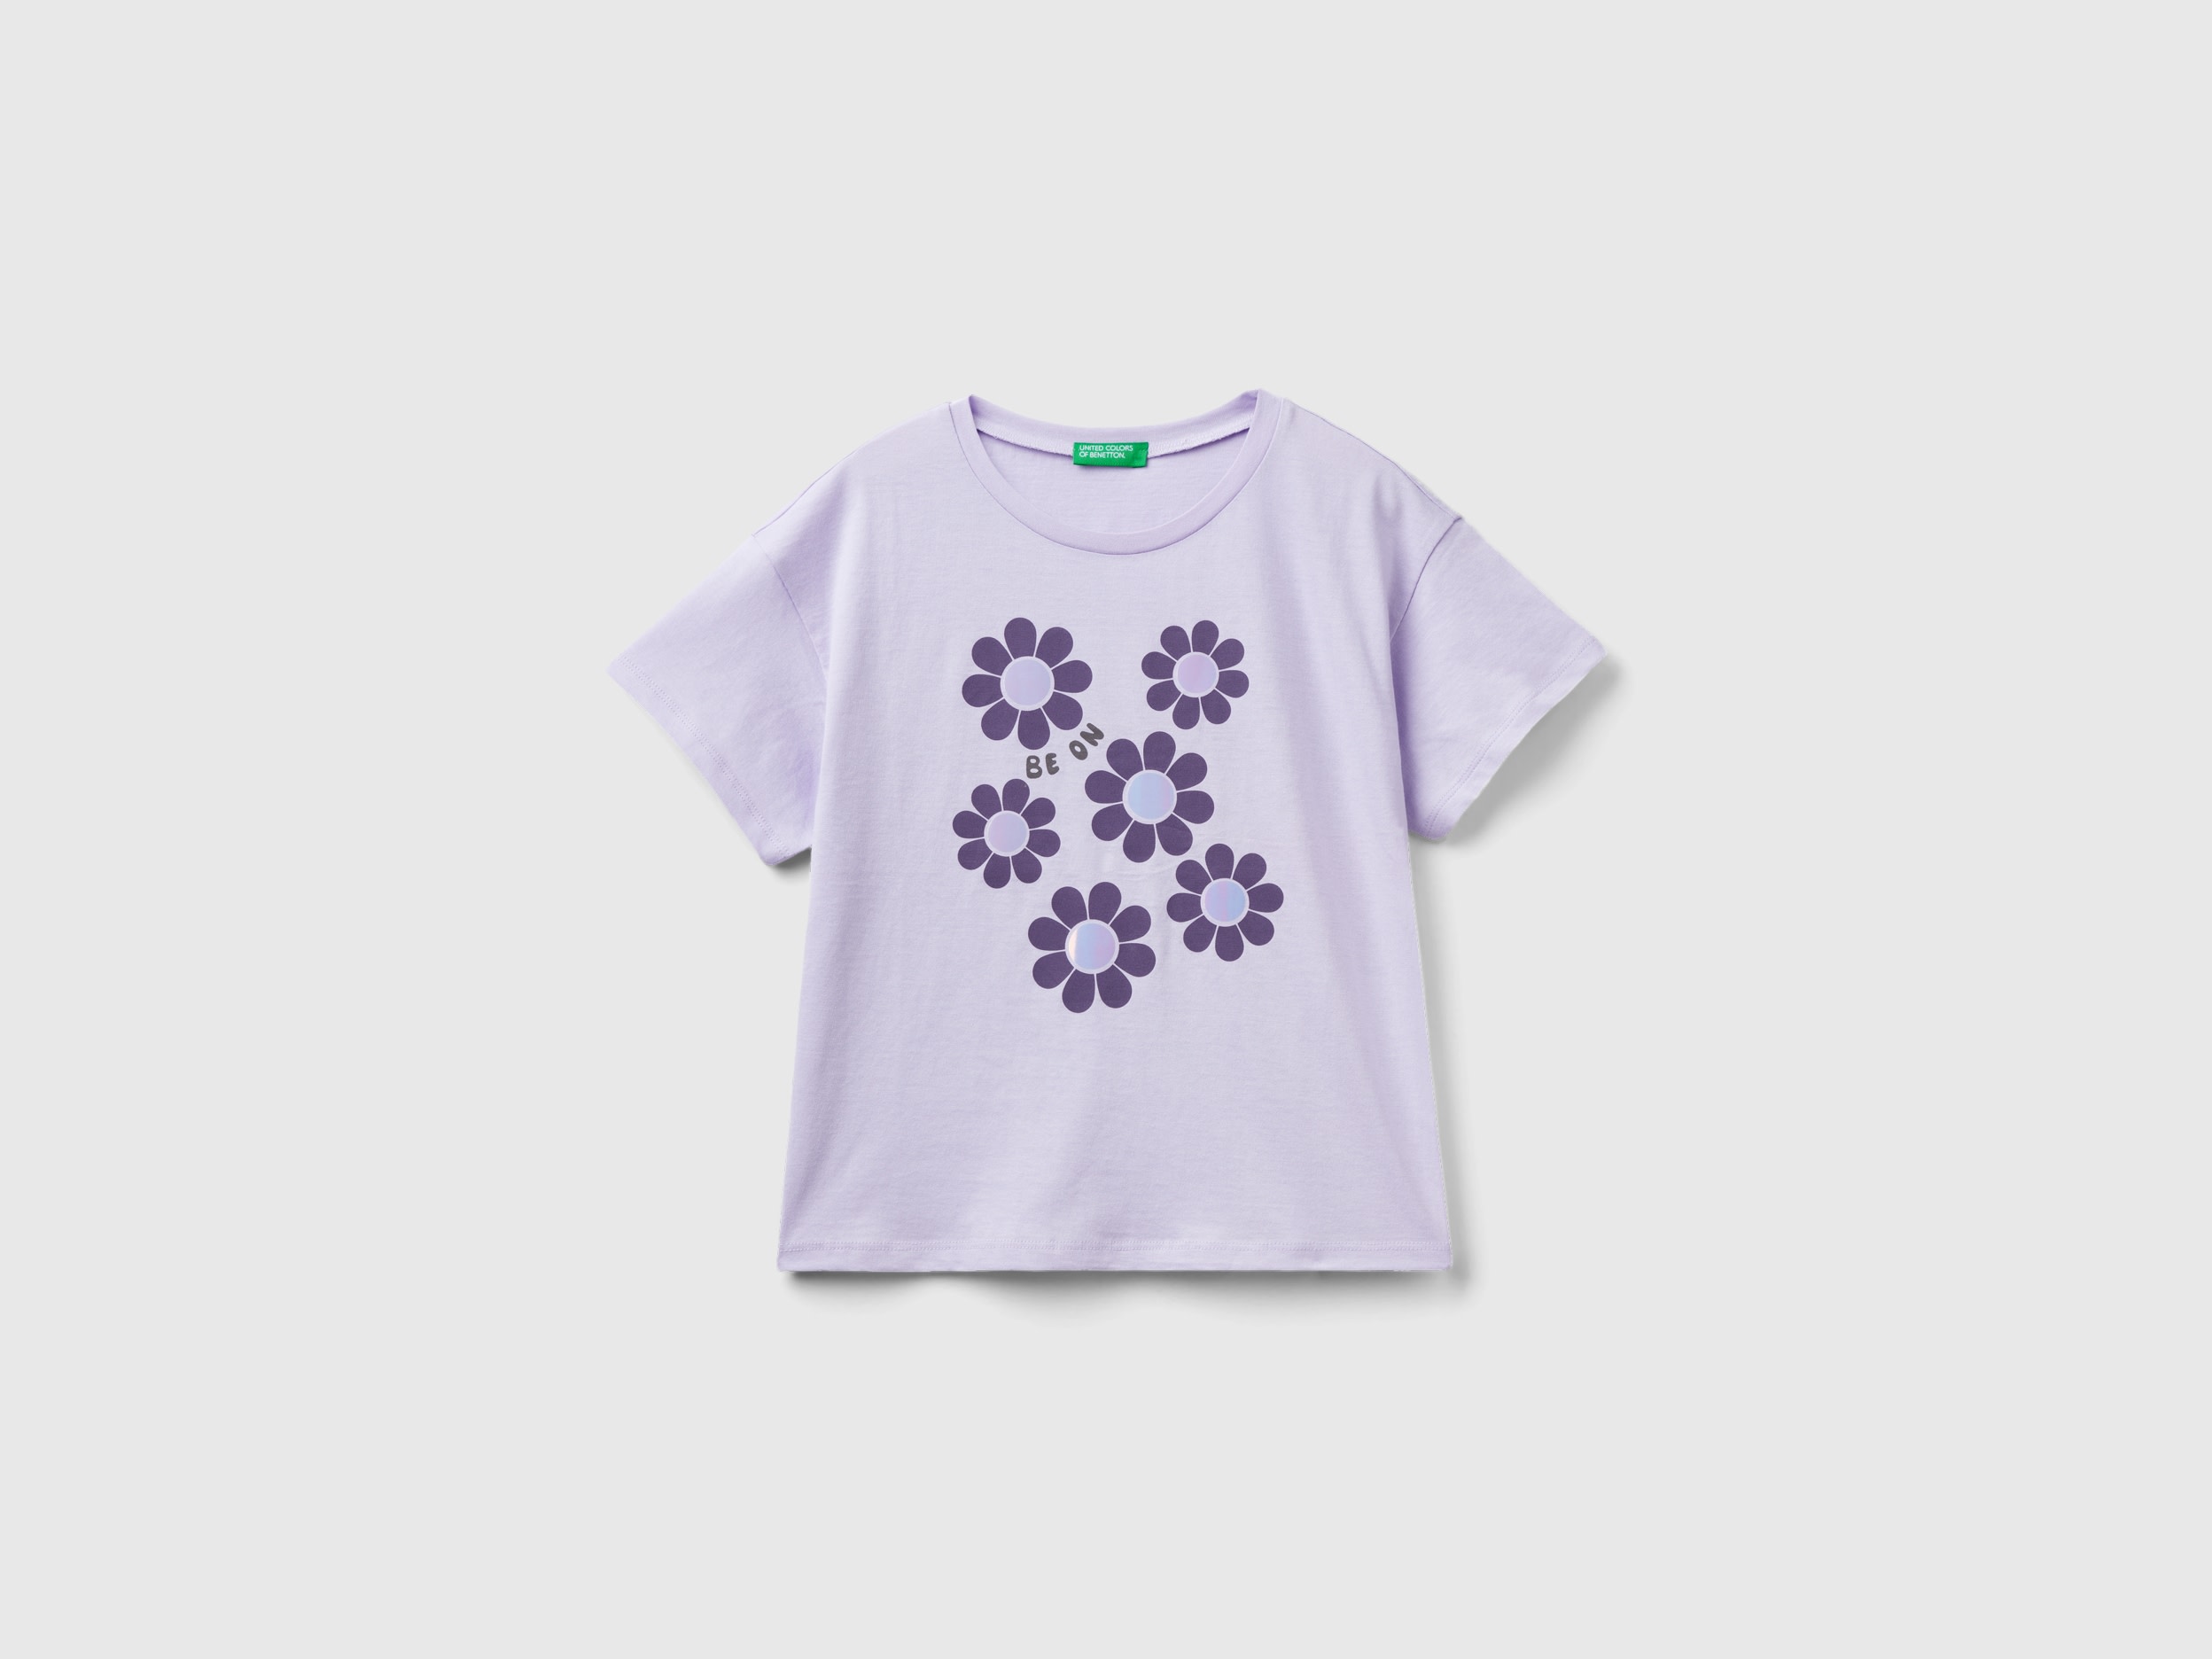 Benetton, Short Sleeve T-shirt With Print, size 2XL, Lilac, Kids